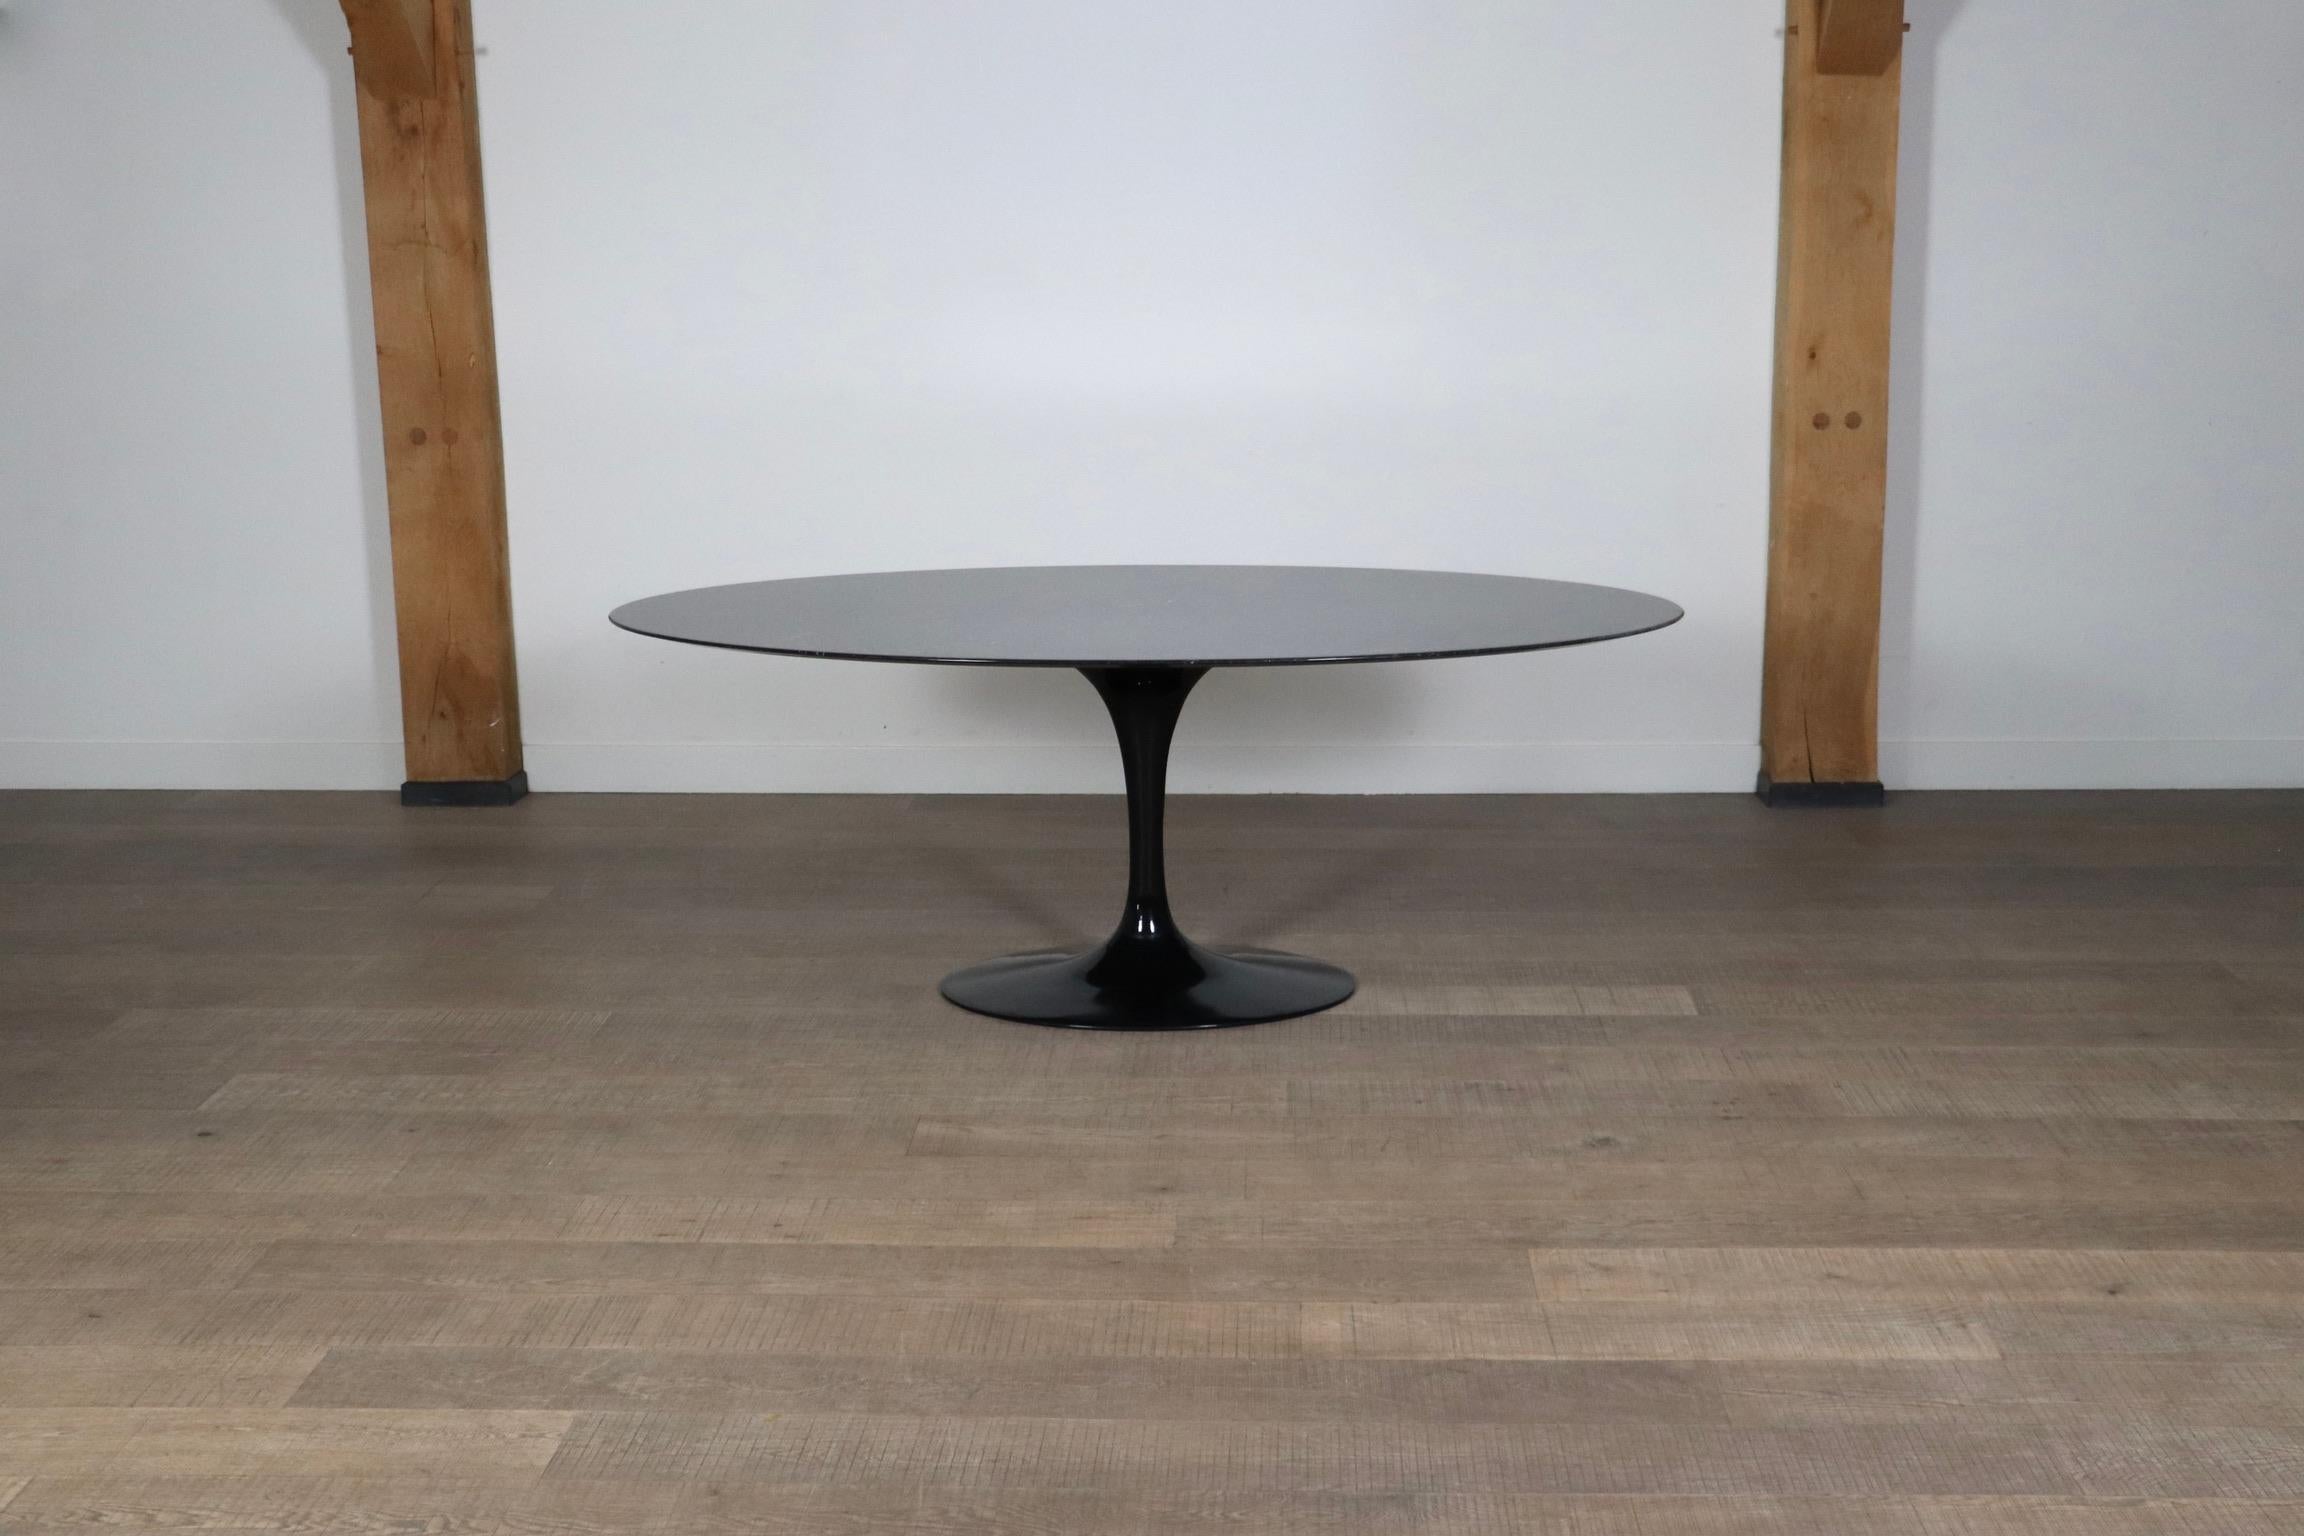 Vintage Black Marble Tulip Oval Dining Table By Eero Saarinen For Knoll, 1970s For Sale 2